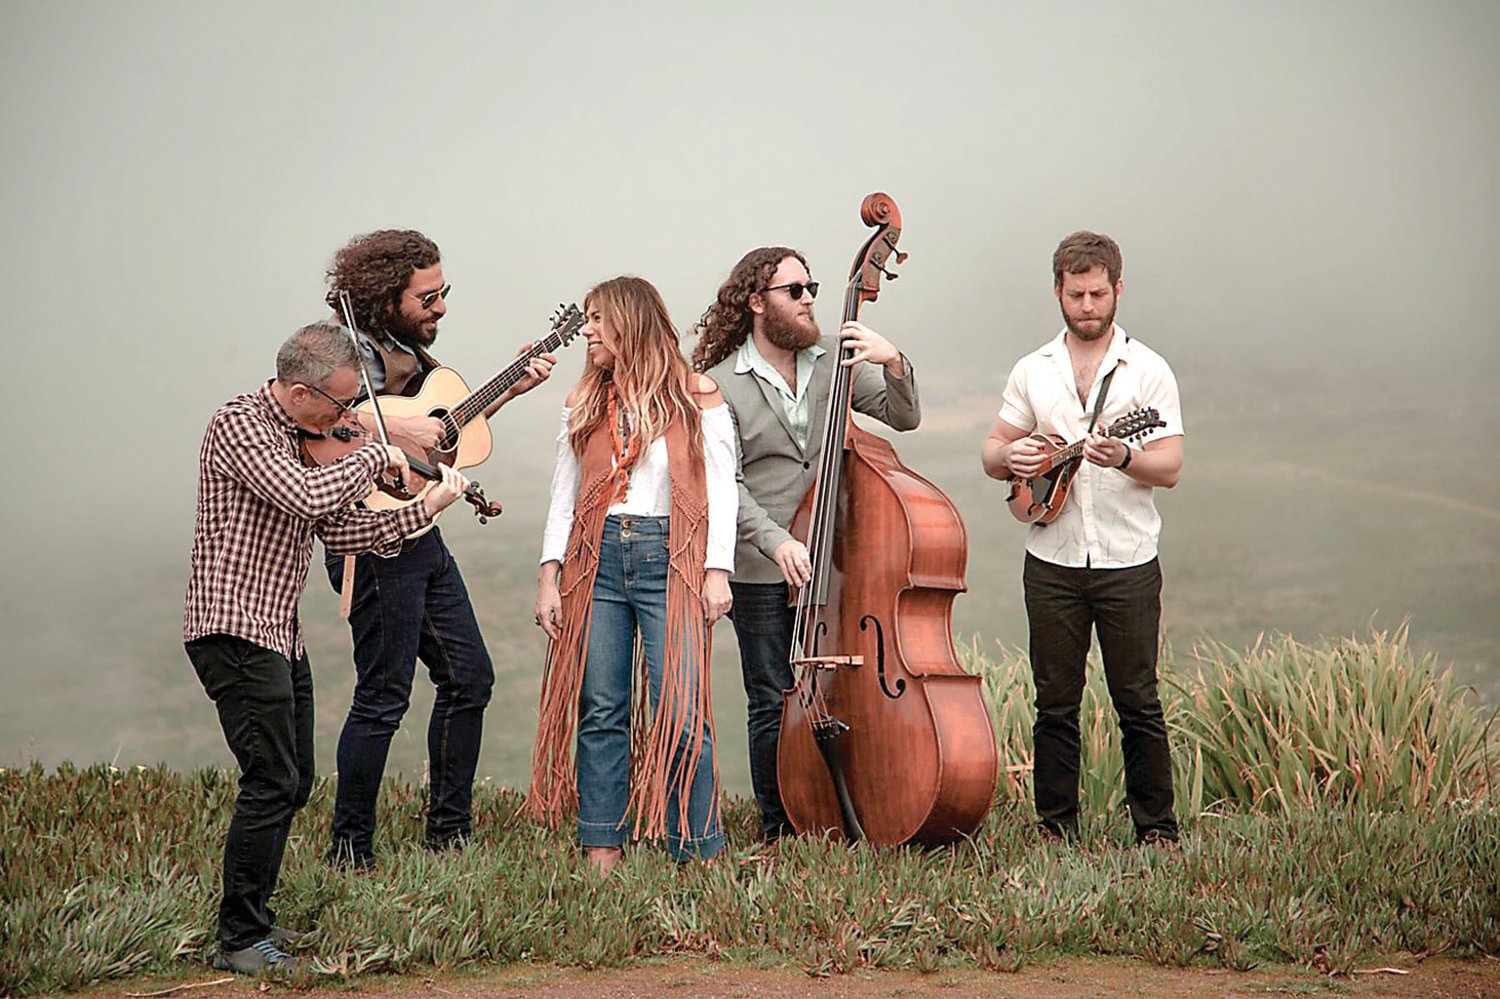 Nefesh Mountain, a boundary-pushing bluegrass Americana band, performs a “Hanukkah Holiday Concert” at the Sellersville Theater Dec. 1.